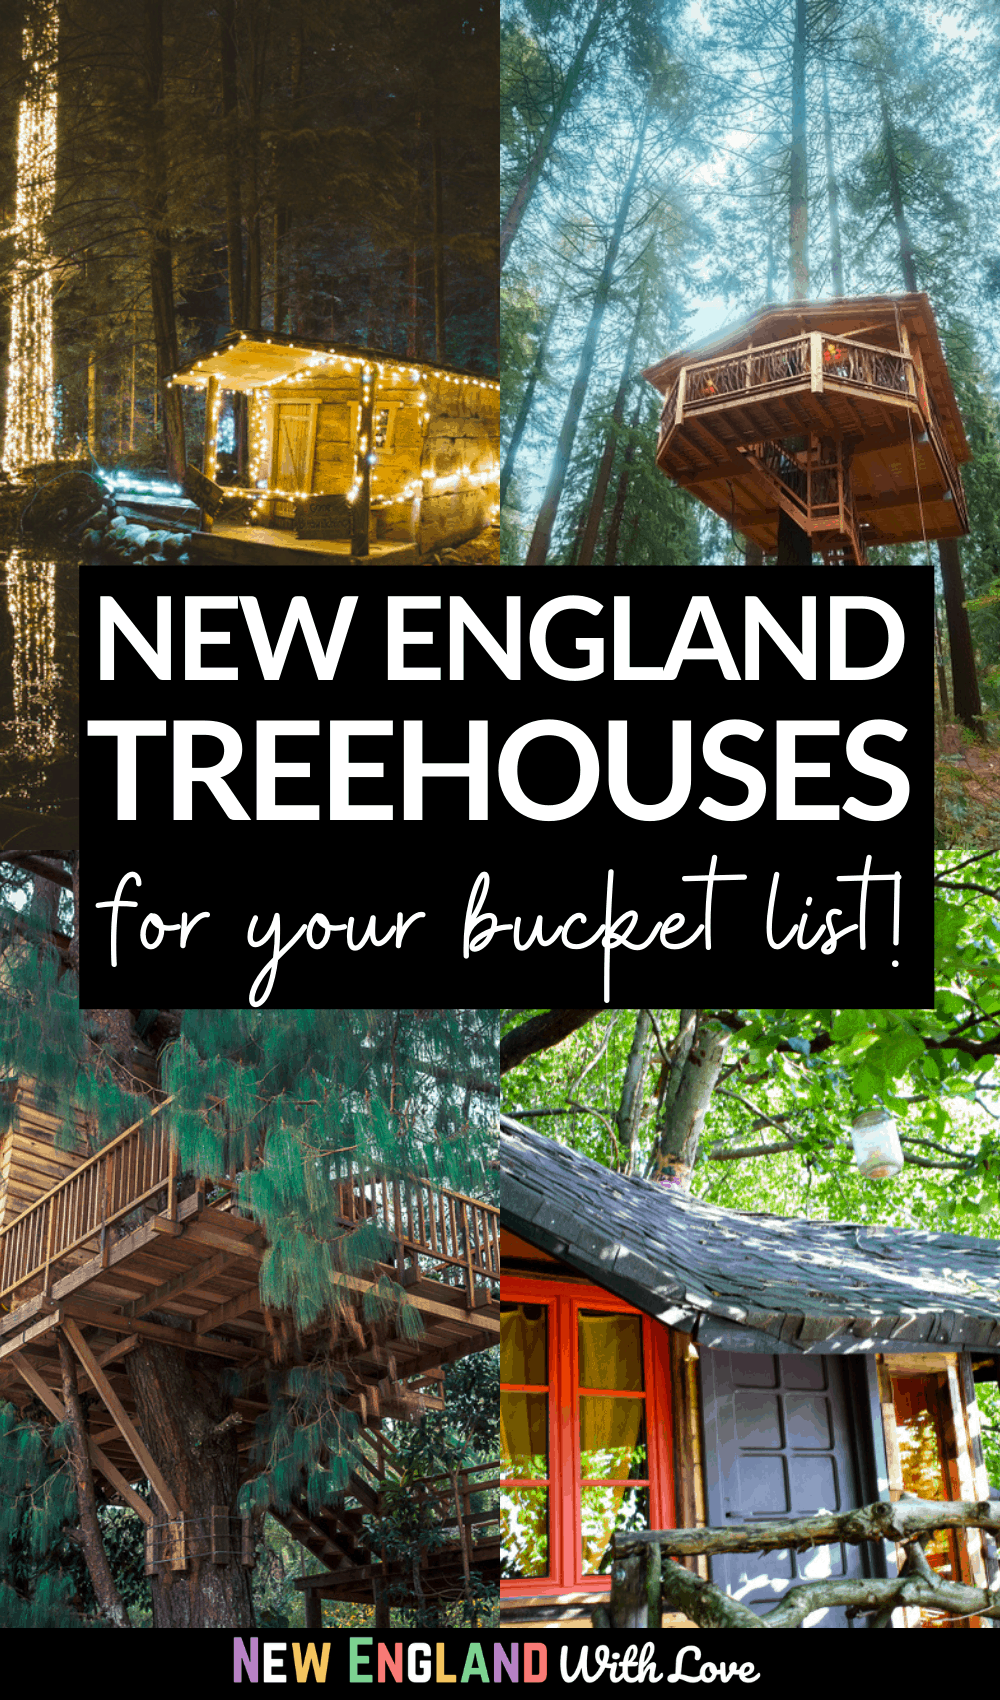 Pinterest graphic reading "NEW ENGLAND TREEHOUSES for your bucket list"